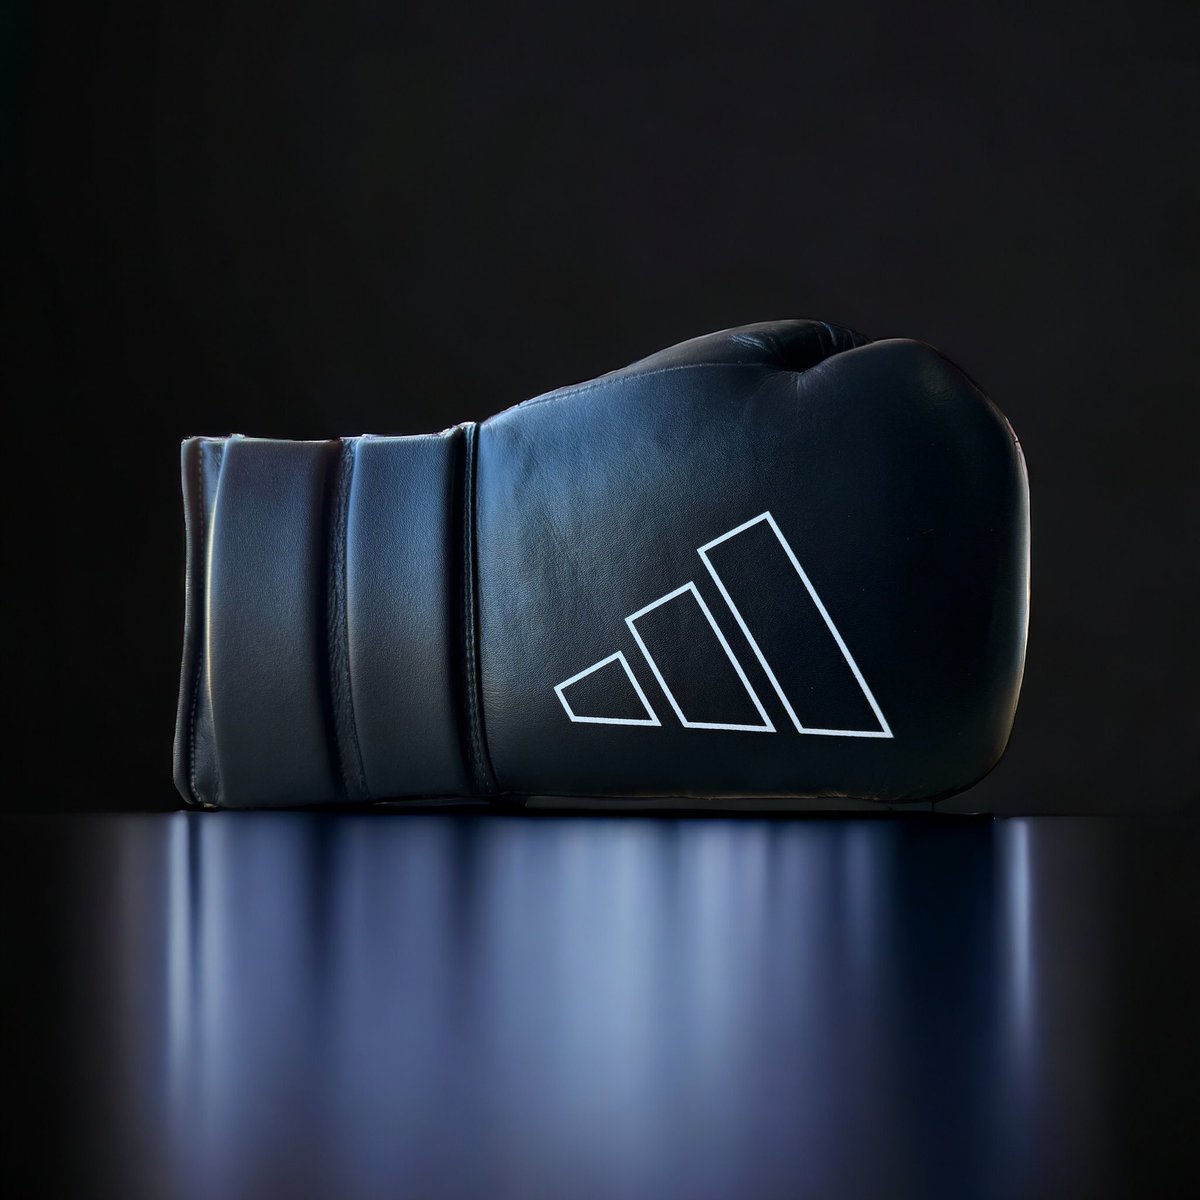 ♠️ Beauty in simplicity ♠️ 🥊 Adidas Hybrid 500 Boxing Gloves